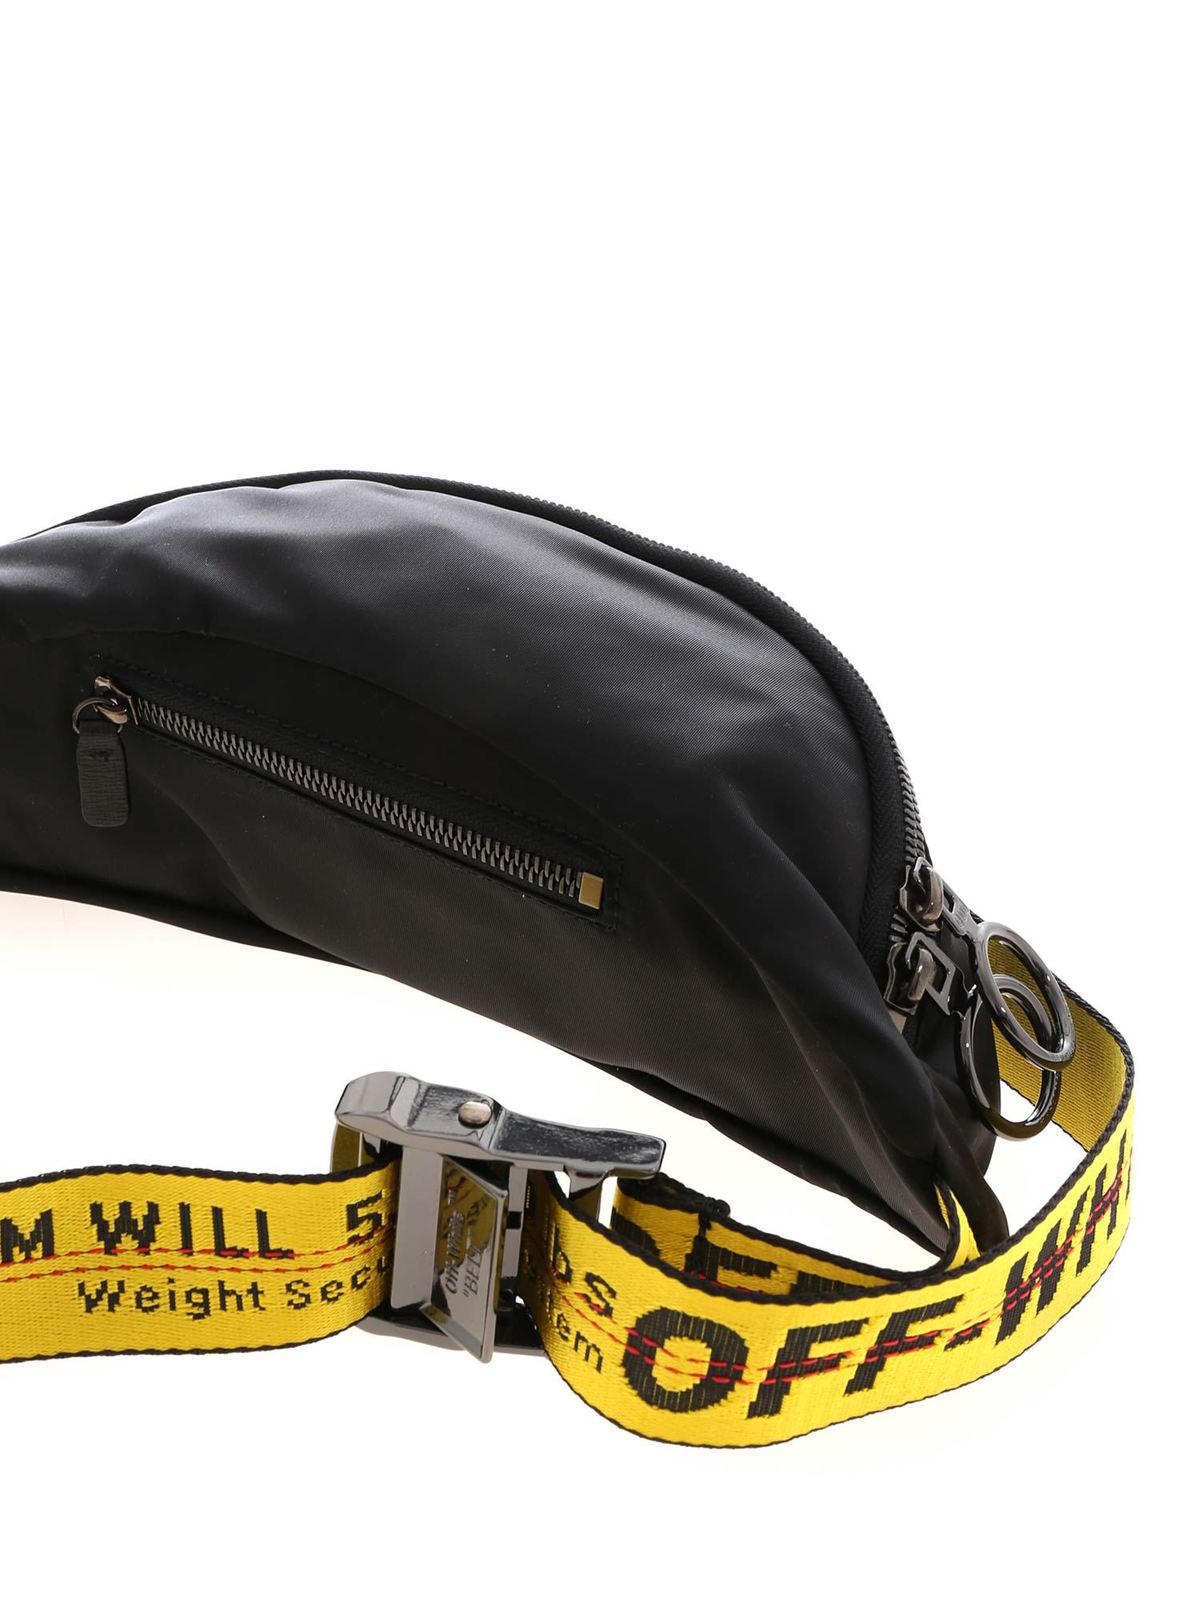 Belt Off-White - Waist bag with Industrial - OMNA074R20E480011000